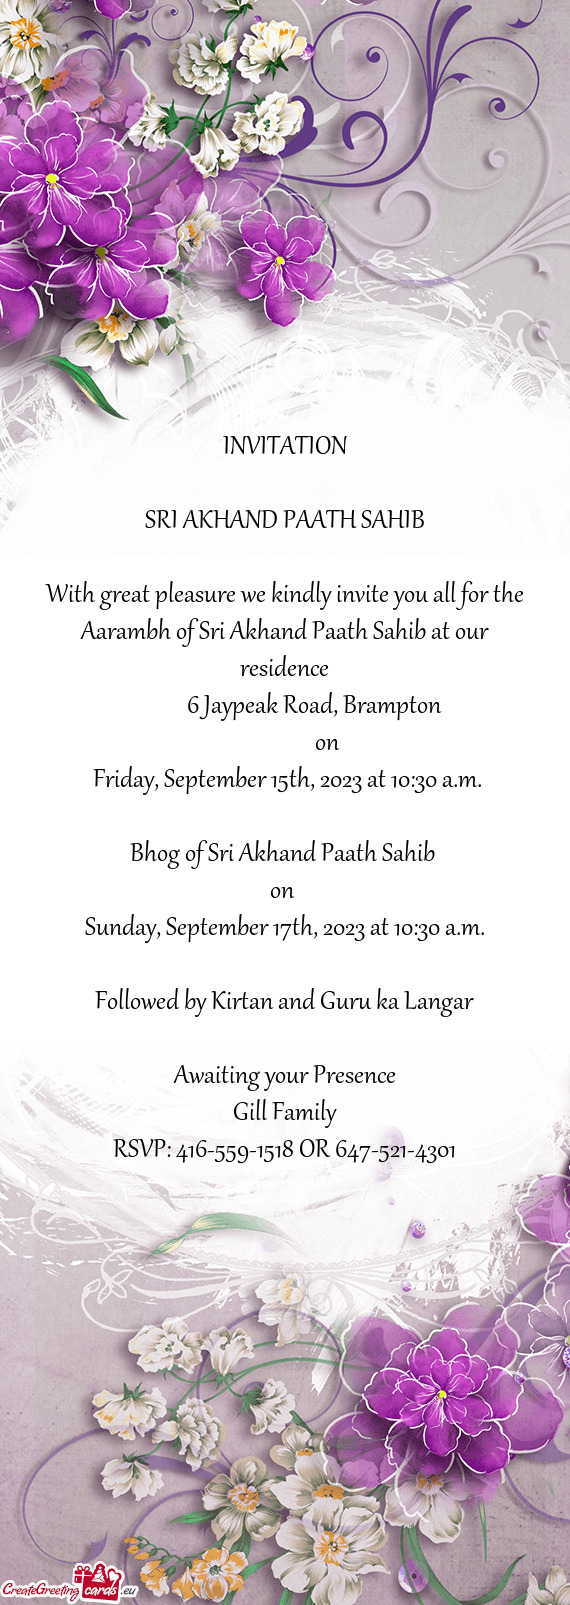 With great pleasure we kindly invite you all for the Aarambh of Sri Akhand Paath Sahib at our reside